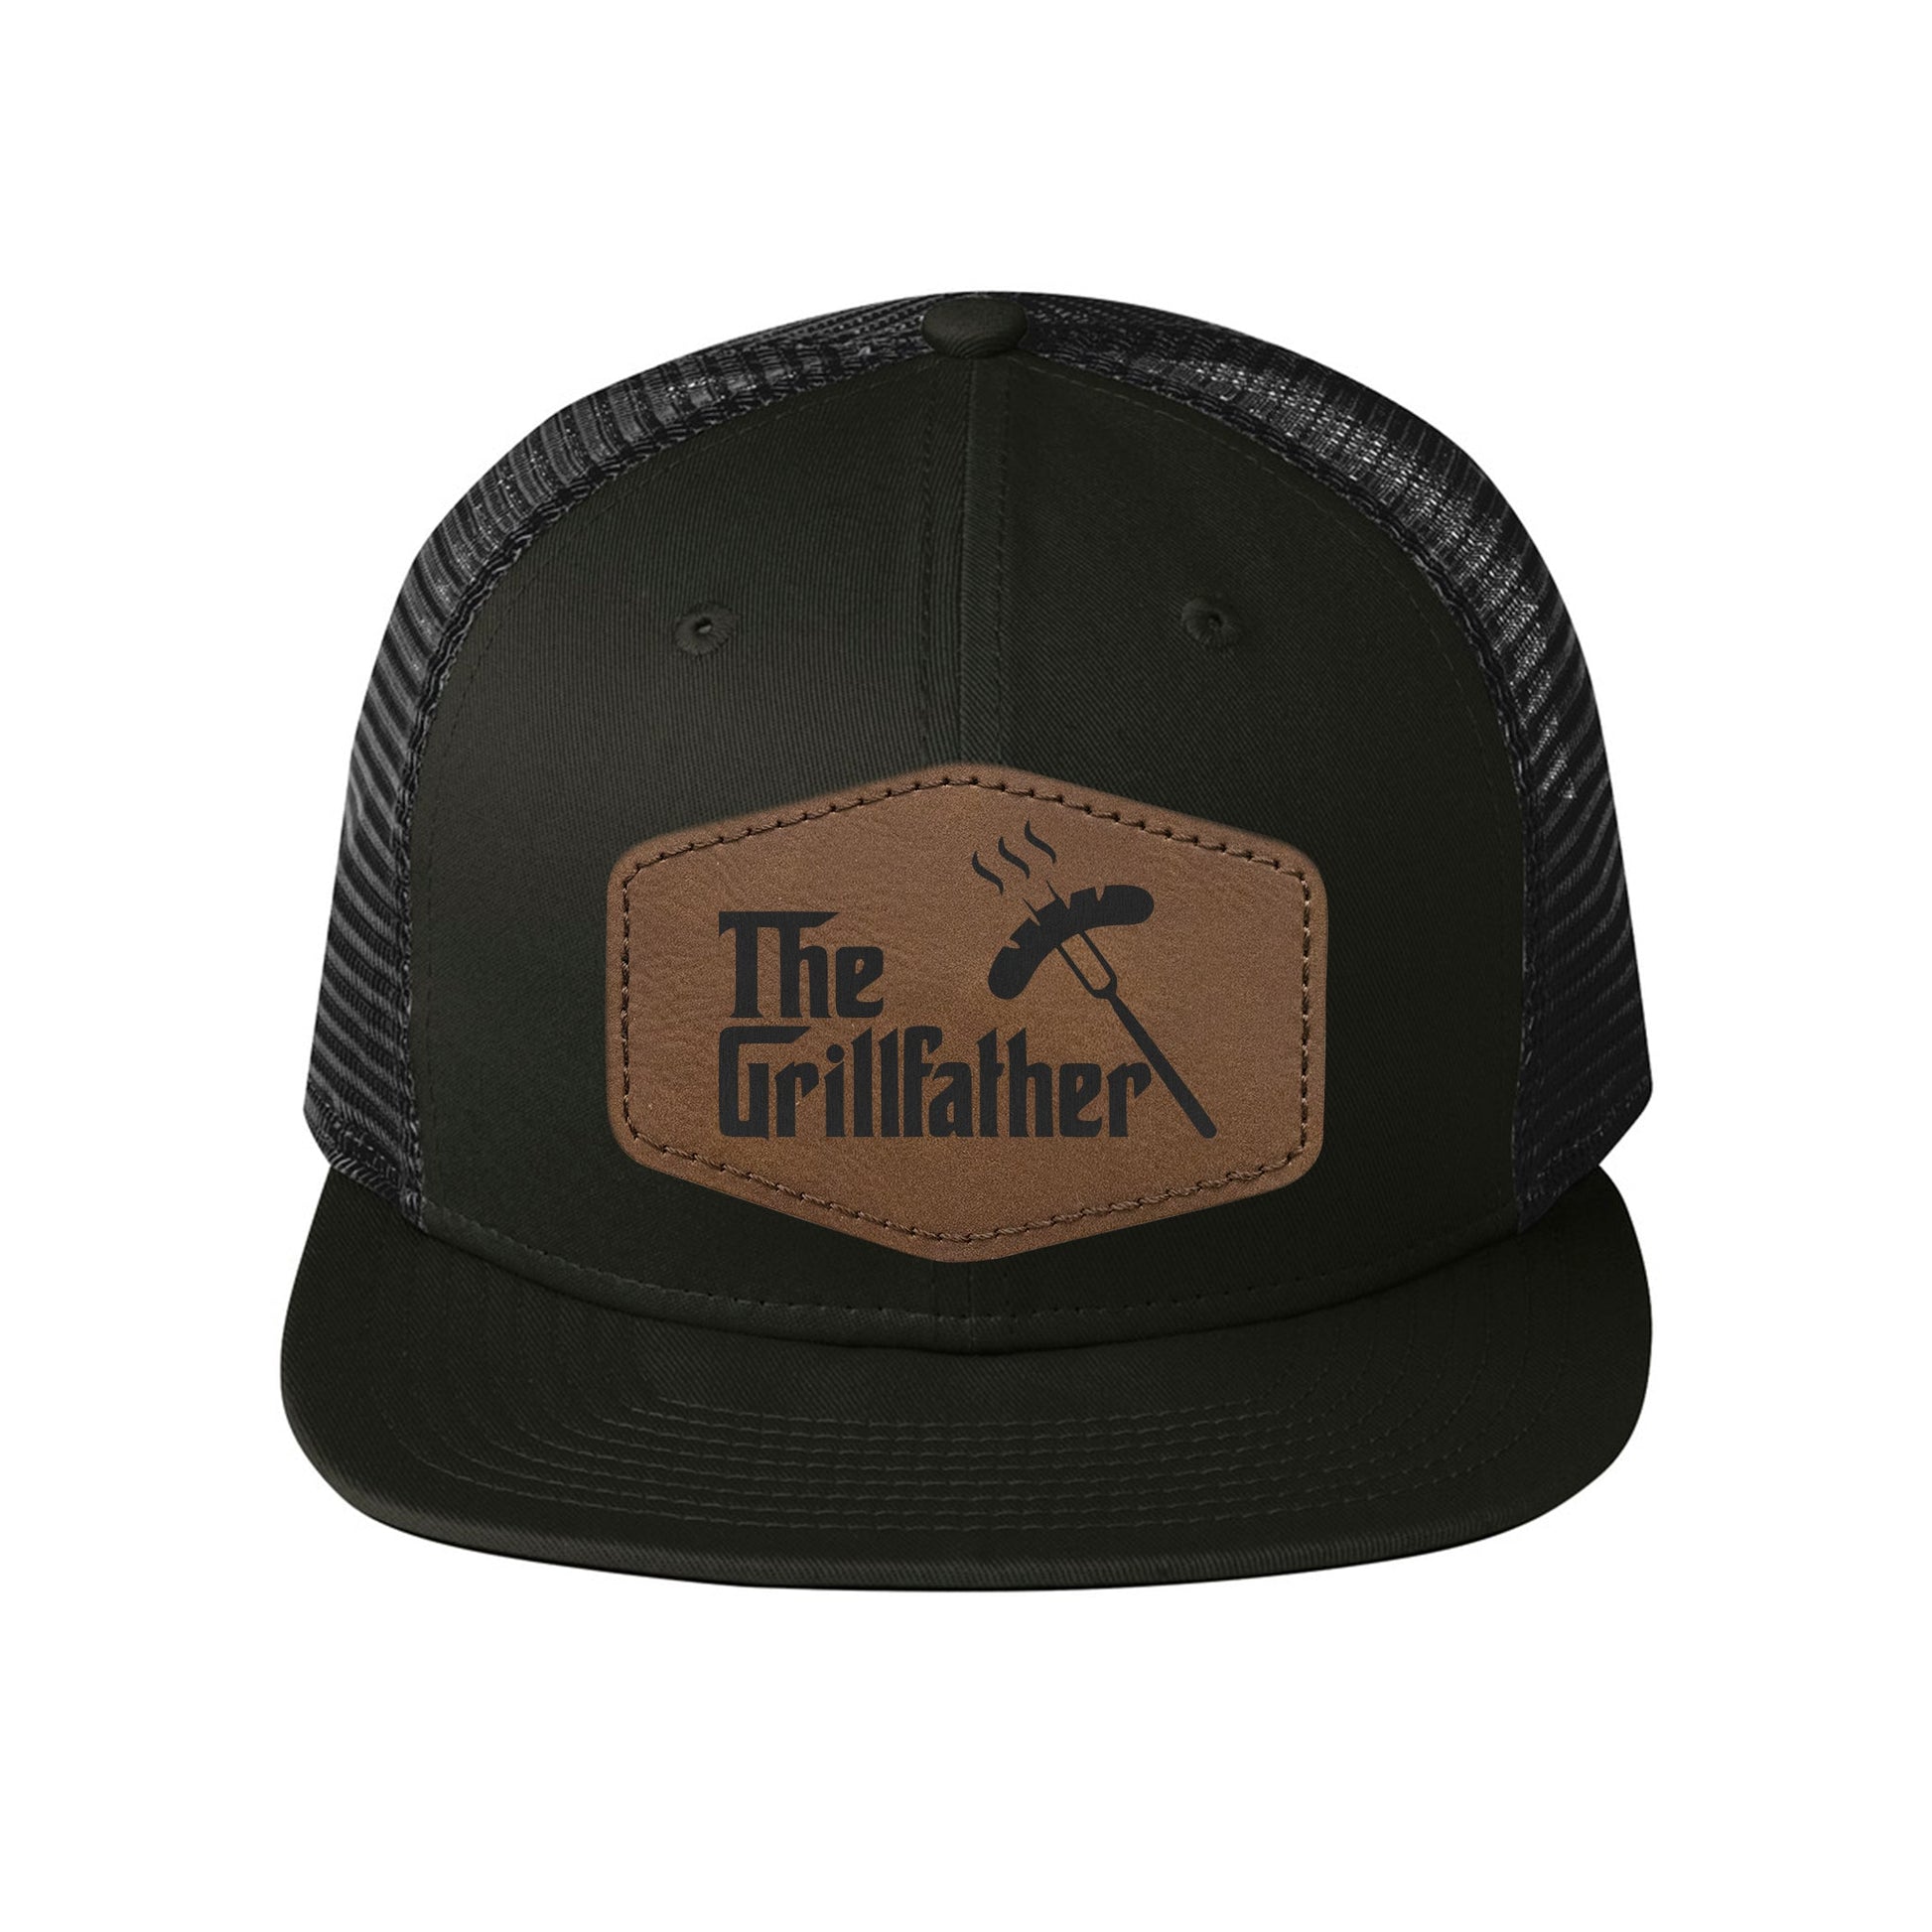 New Era Snapback Trucker Cap with Vegan Leather Hex Patch (NE403) - Etchified-Etchified-